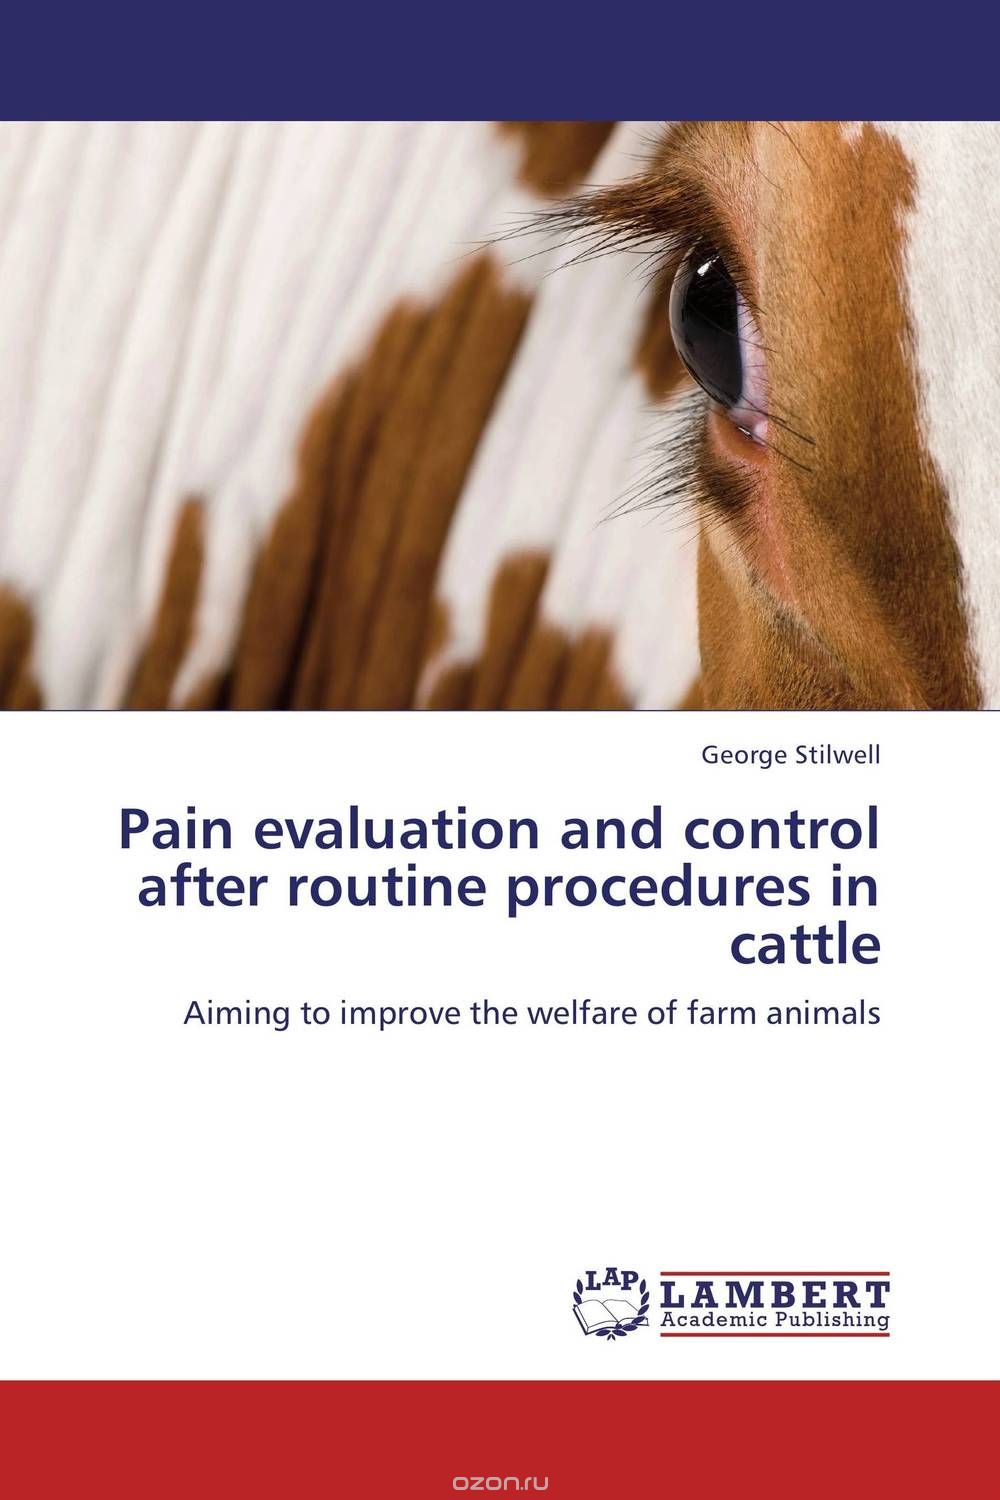 Pain evaluation and control after routine procedures in cattle